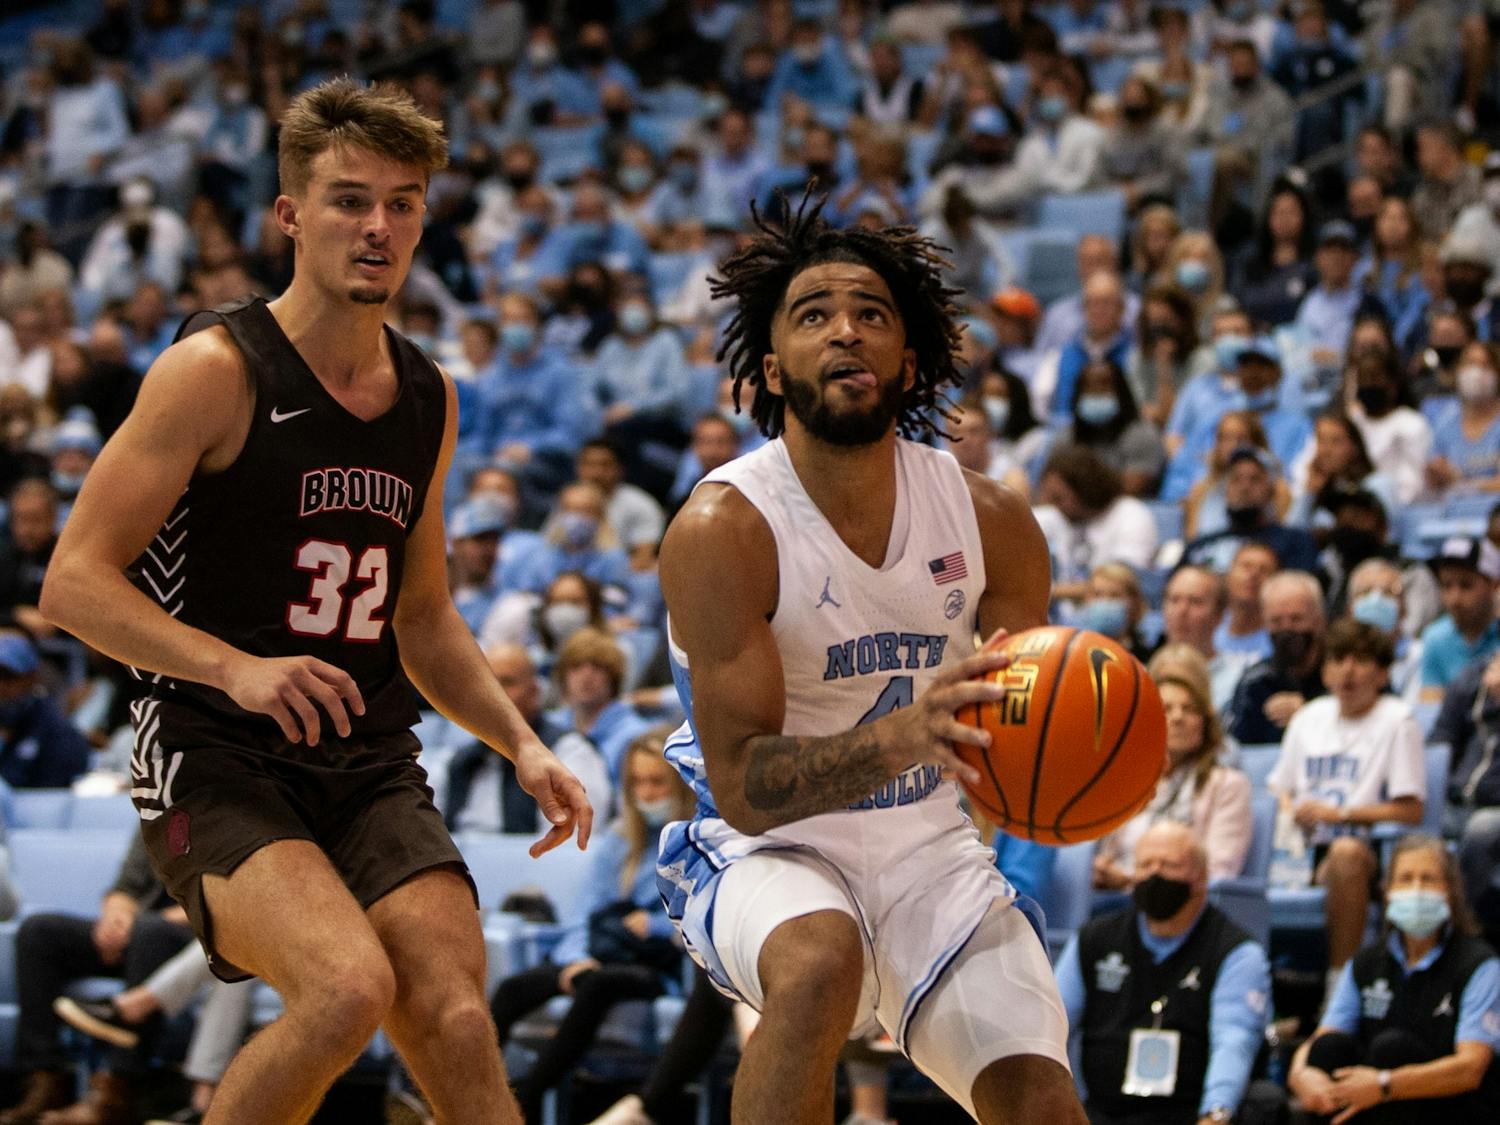 Sophomore guard RJ Davis (4) prepares to go up for a layup in a game against Brown at the Smith Center on Nov. 12. The Tar Heels defeated Brown 94-87, earning their second win of the season.